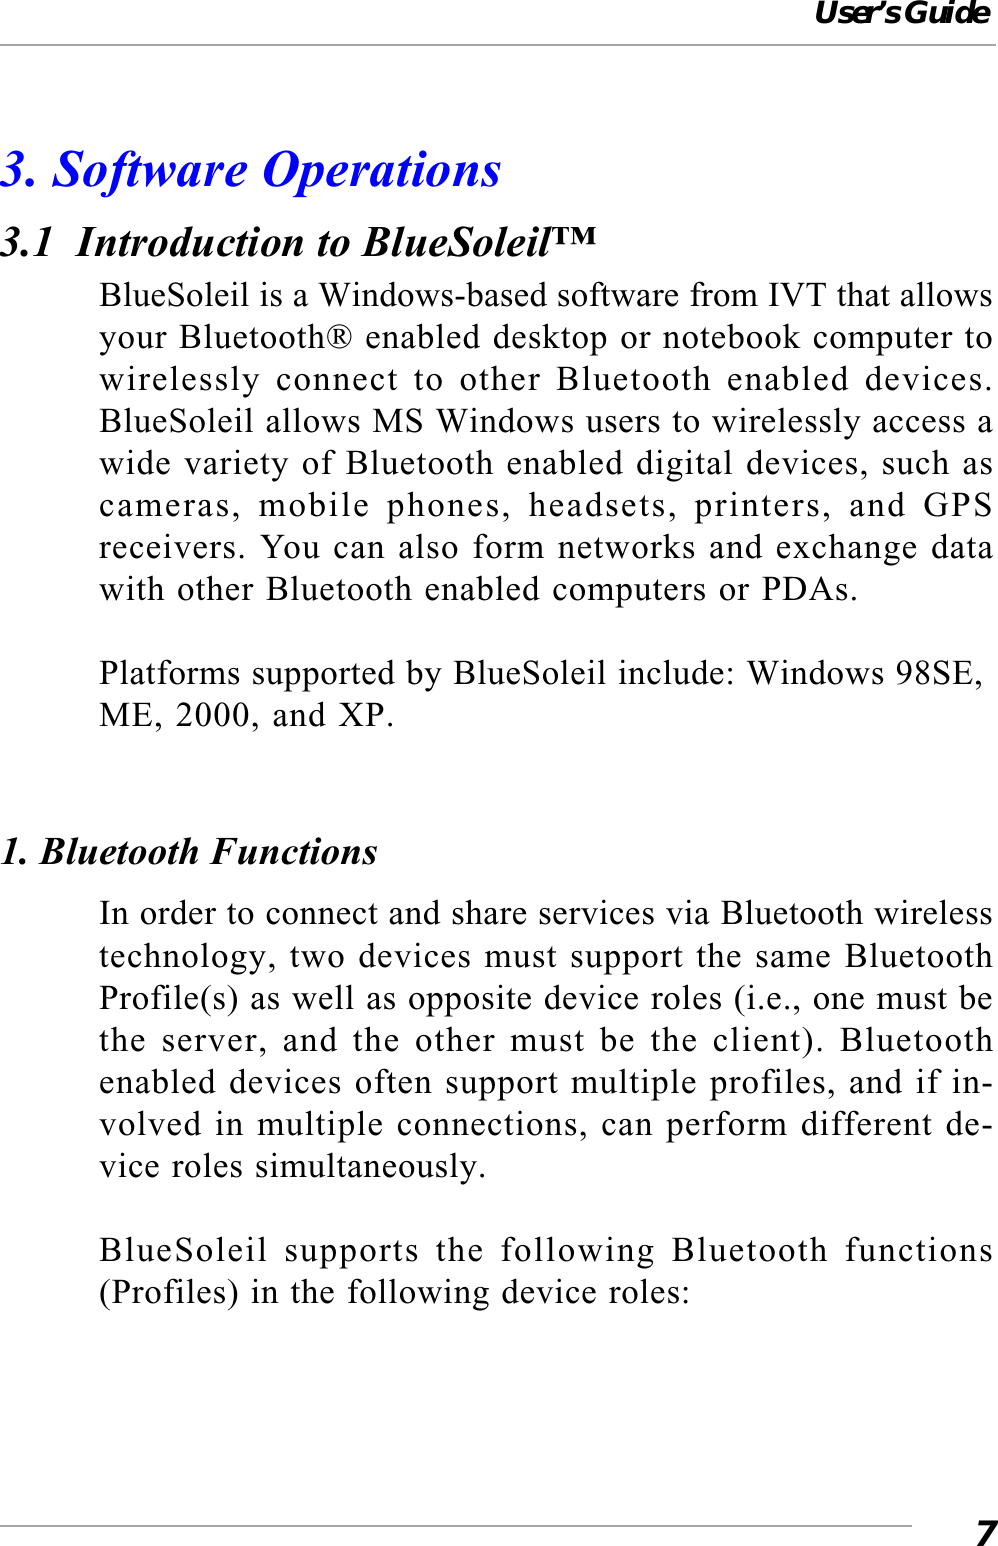 User’s Guide73. Software Operations3.1  Introduction to BlueSoleil™BlueSoleil is a Windows-based software from IVT that allowsyour Bluetooth® enabled desktop or notebook computer towirelessly connect to other Bluetooth enabled devices.BlueSoleil allows MS Windows users to wirelessly access awide variety of Bluetooth enabled digital devices, such ascameras, mobile phones, headsets, printers, and GPSreceivers. You can also form networks and exchange datawith other Bluetooth enabled computers or PDAs.Platforms supported by BlueSoleil include: Windows 98SE,ME, 2000, and XP.1. Bluetooth FunctionsIn order to connect and share services via Bluetooth wirelesstechnology, two devices must support the same BluetoothProfile(s) as well as opposite device roles (i.e., one must bethe server, and the other must be the client). Bluetoothenabled devices often support multiple profiles, and if in-volved in multiple connections, can perform different de-vice roles simultaneously.BlueSoleil supports the following Bluetooth functions(Profiles) in the following device roles: